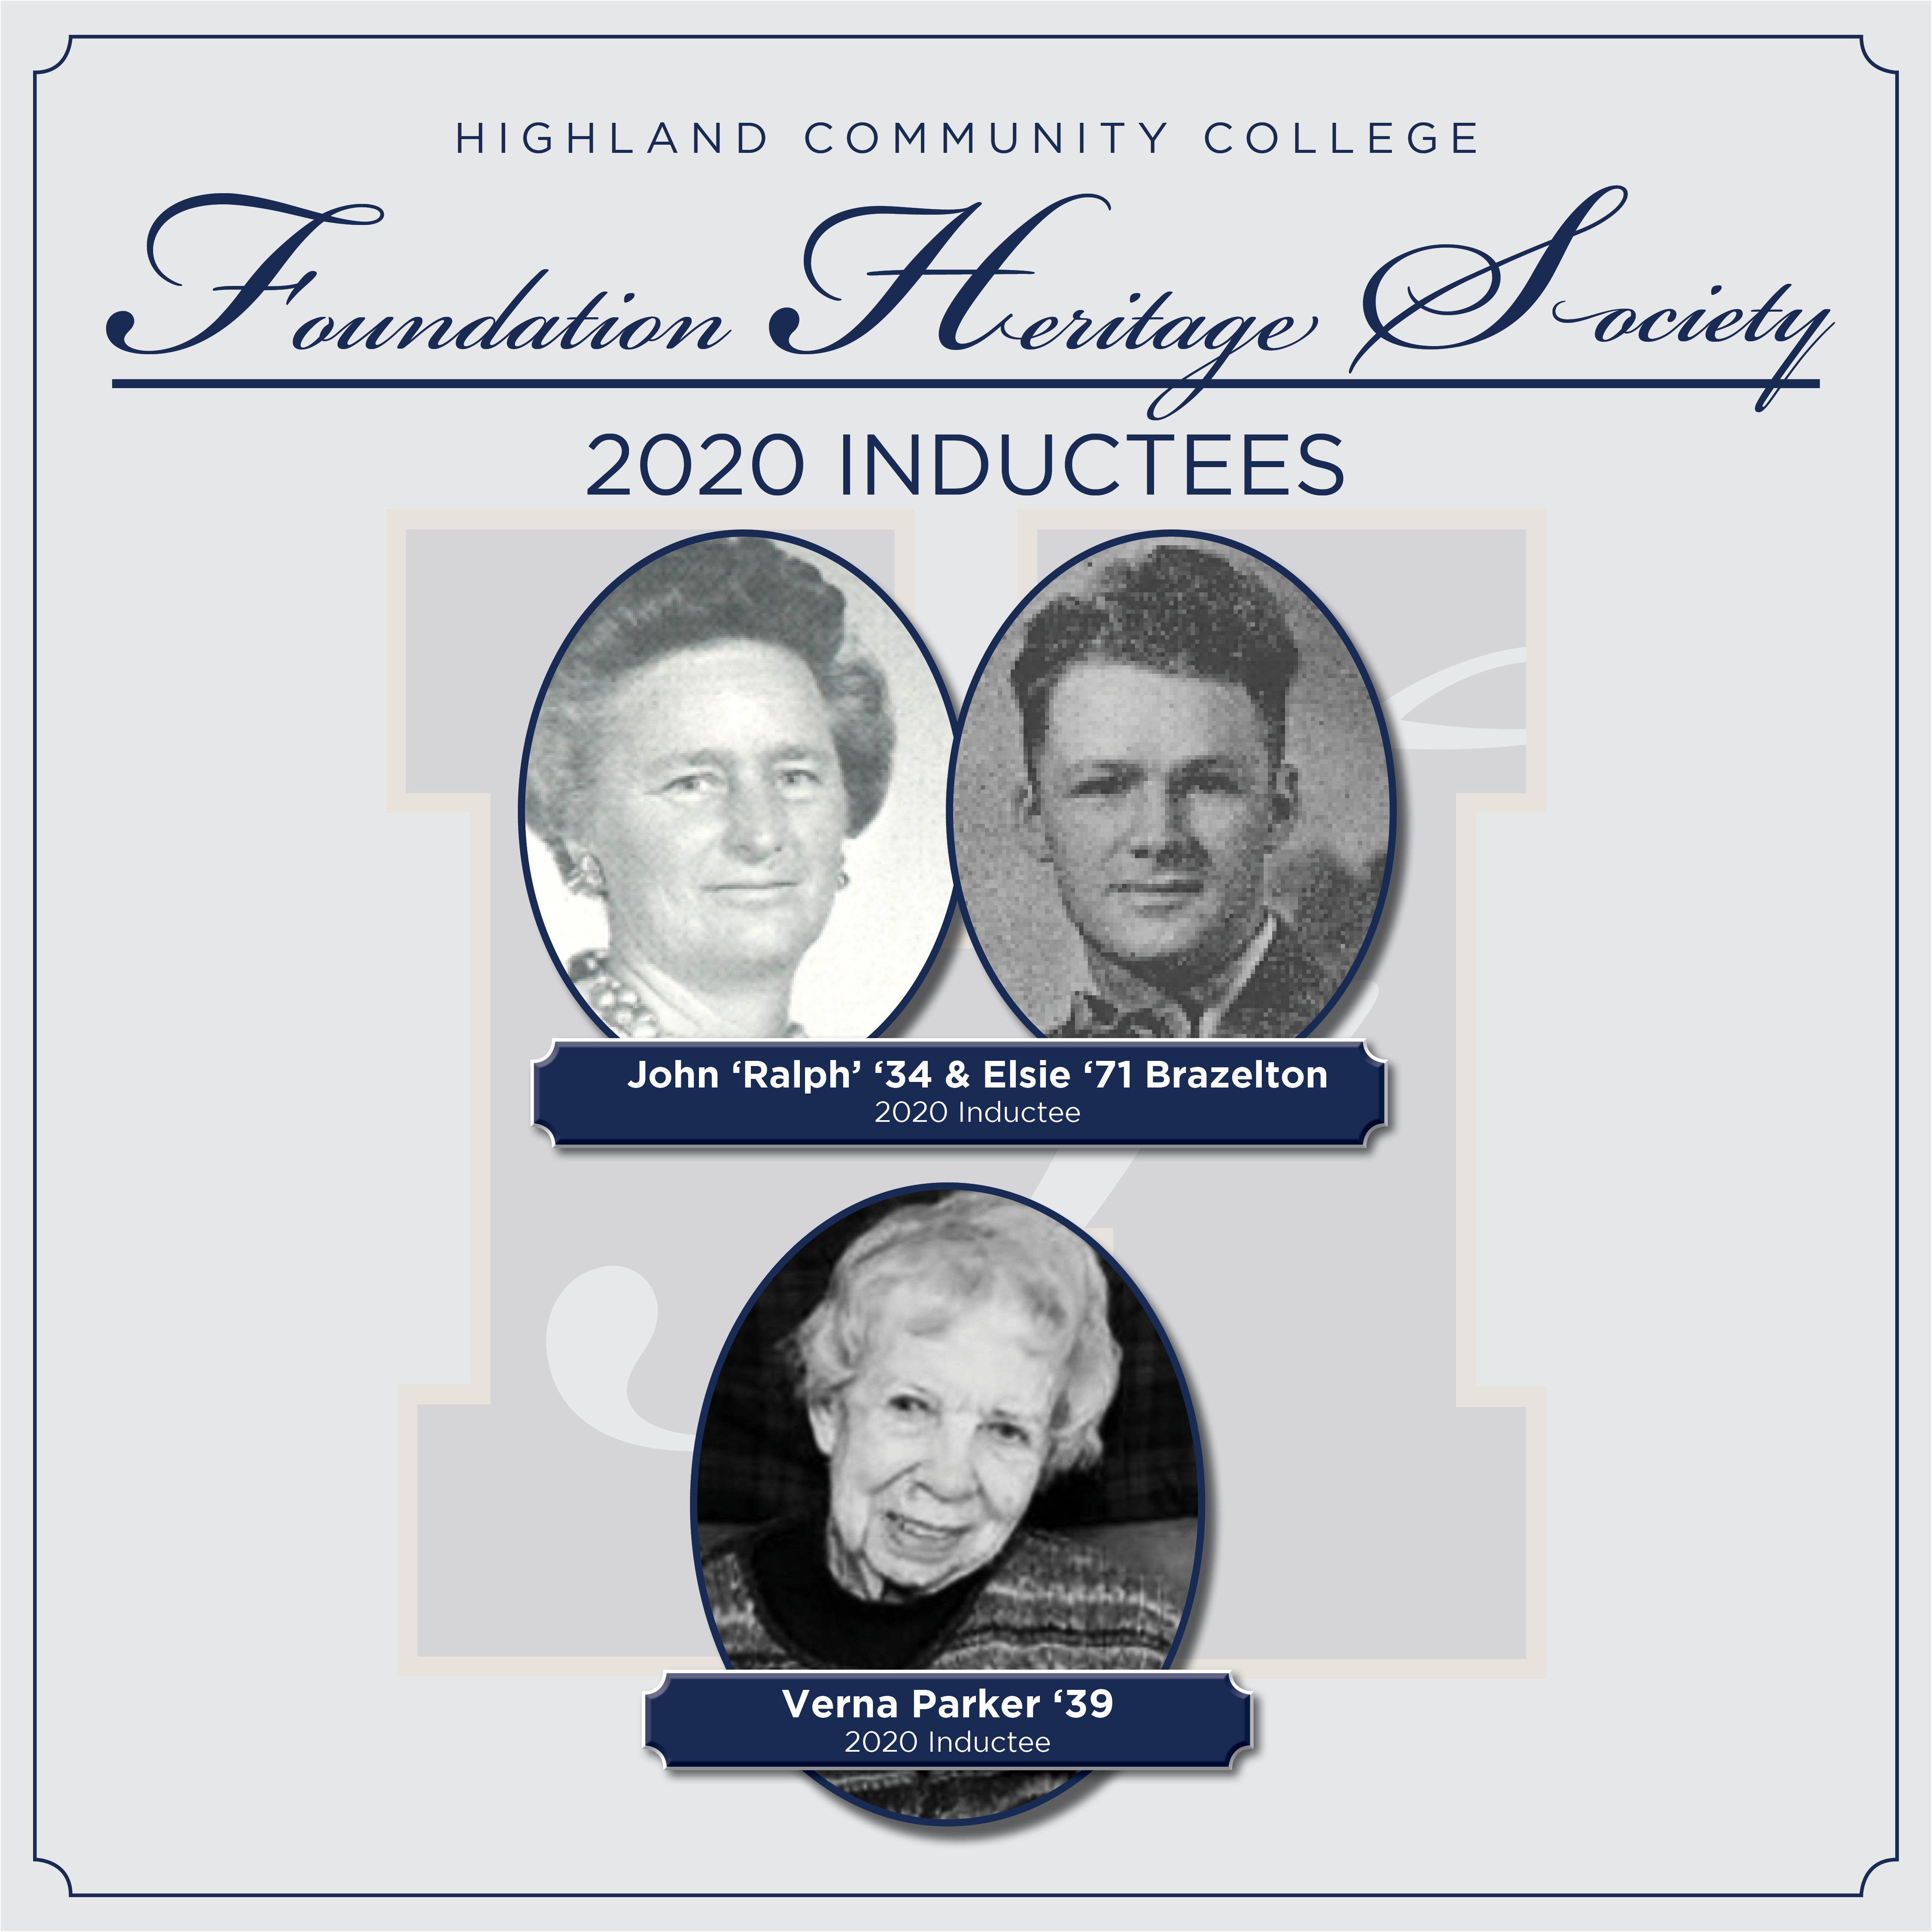 The Highland Community College Foundation's Heritage Society Welcomes New Members